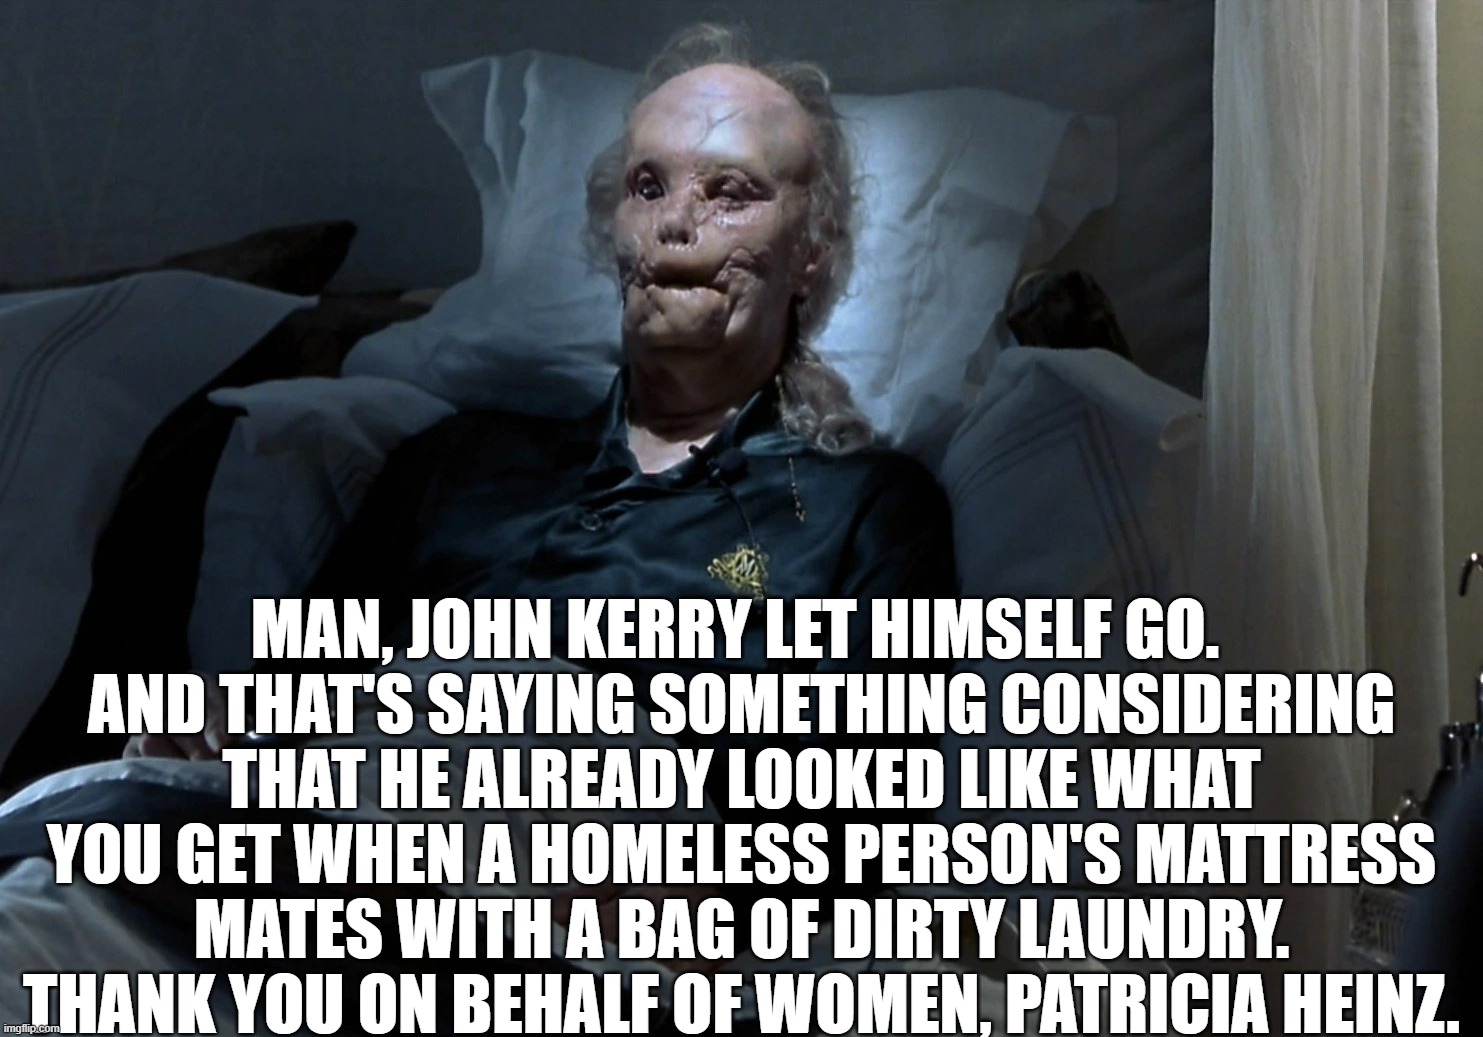 John Kerry is Ugly |  MAN, JOHN KERRY LET HIMSELF GO. 
AND THAT'S SAYING SOMETHING CONSIDERING THAT HE ALREADY LOOKED LIKE WHAT YOU GET WHEN A HOMELESS PERSON'S MATTRESS MATES WITH A BAG OF DIRTY LAUNDRY.
THANK YOU ON BEHALF OF WOMEN, PATRICIA HEINZ. | image tagged in john kerry,patricia heinz,stupid people | made w/ Imgflip meme maker